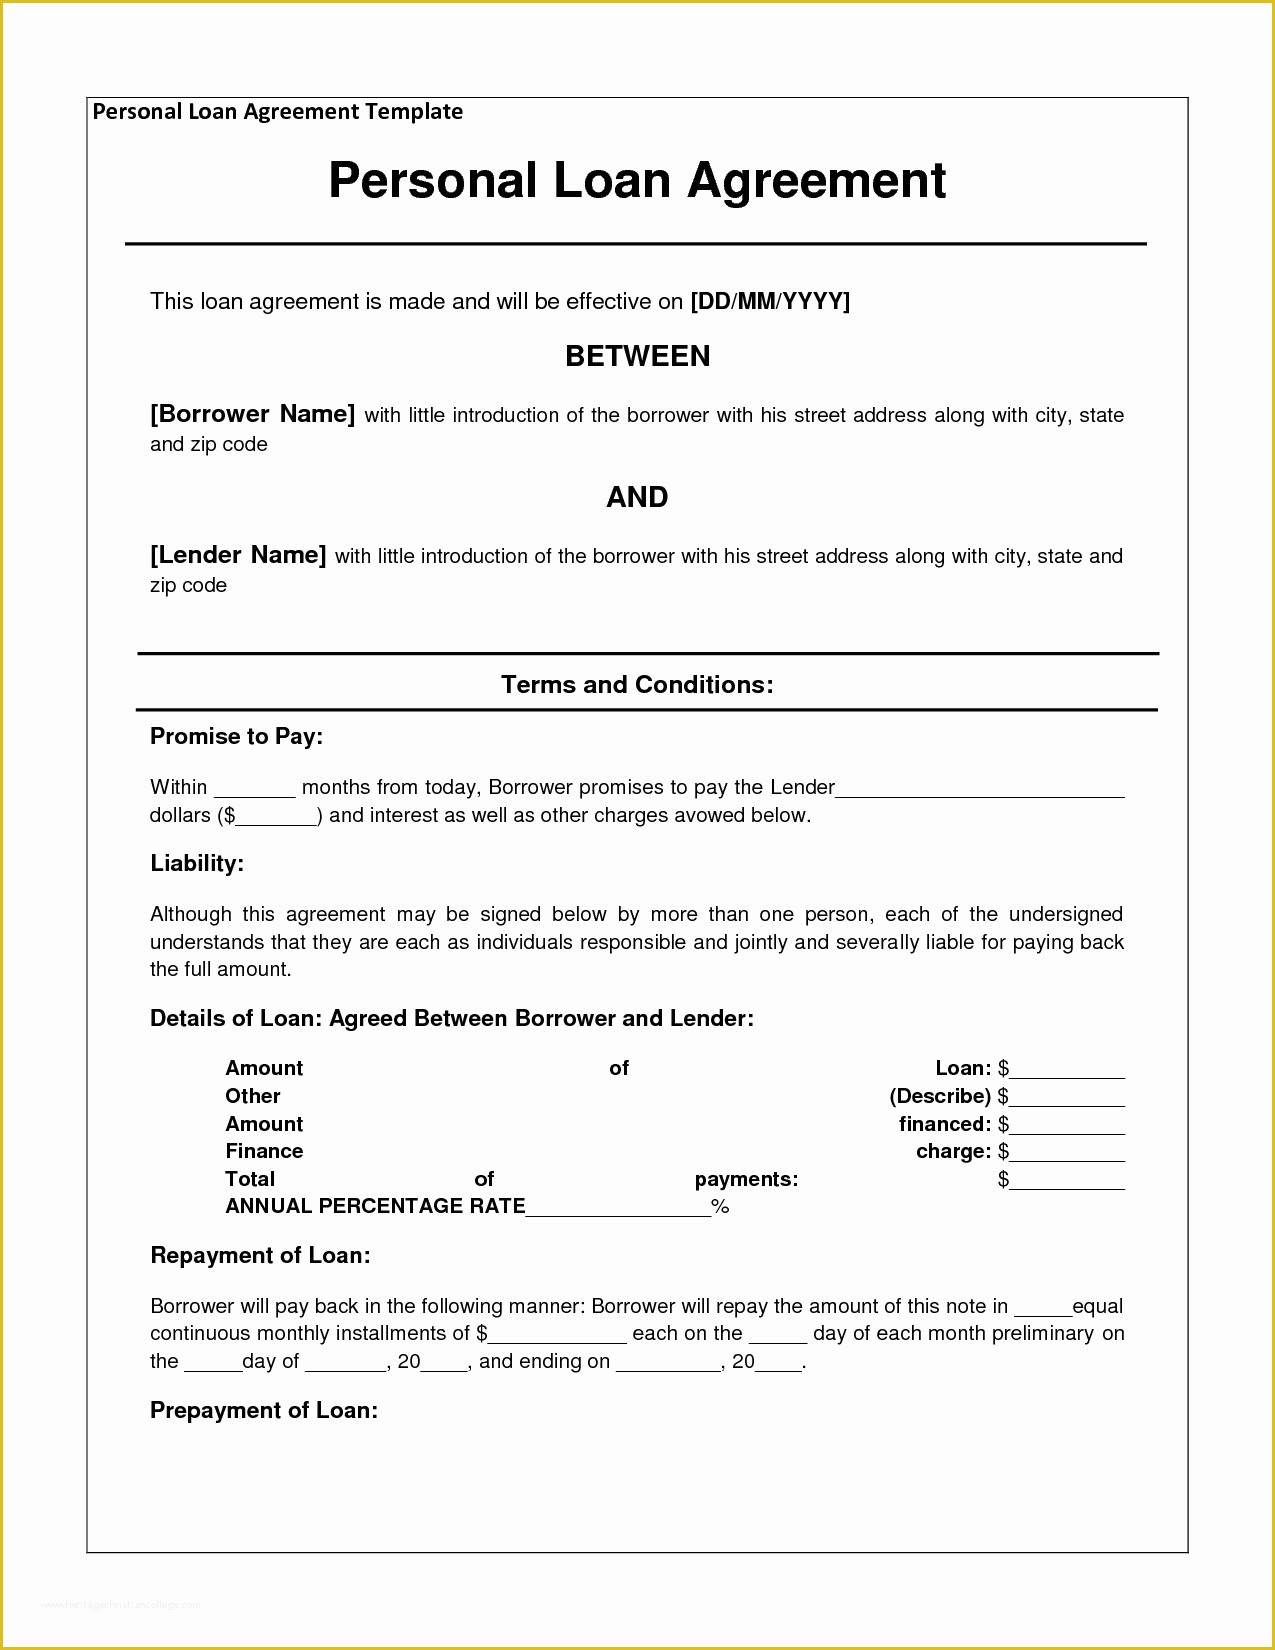 Personal Loan Agreement Template Free Download Of Template Loan Agreement